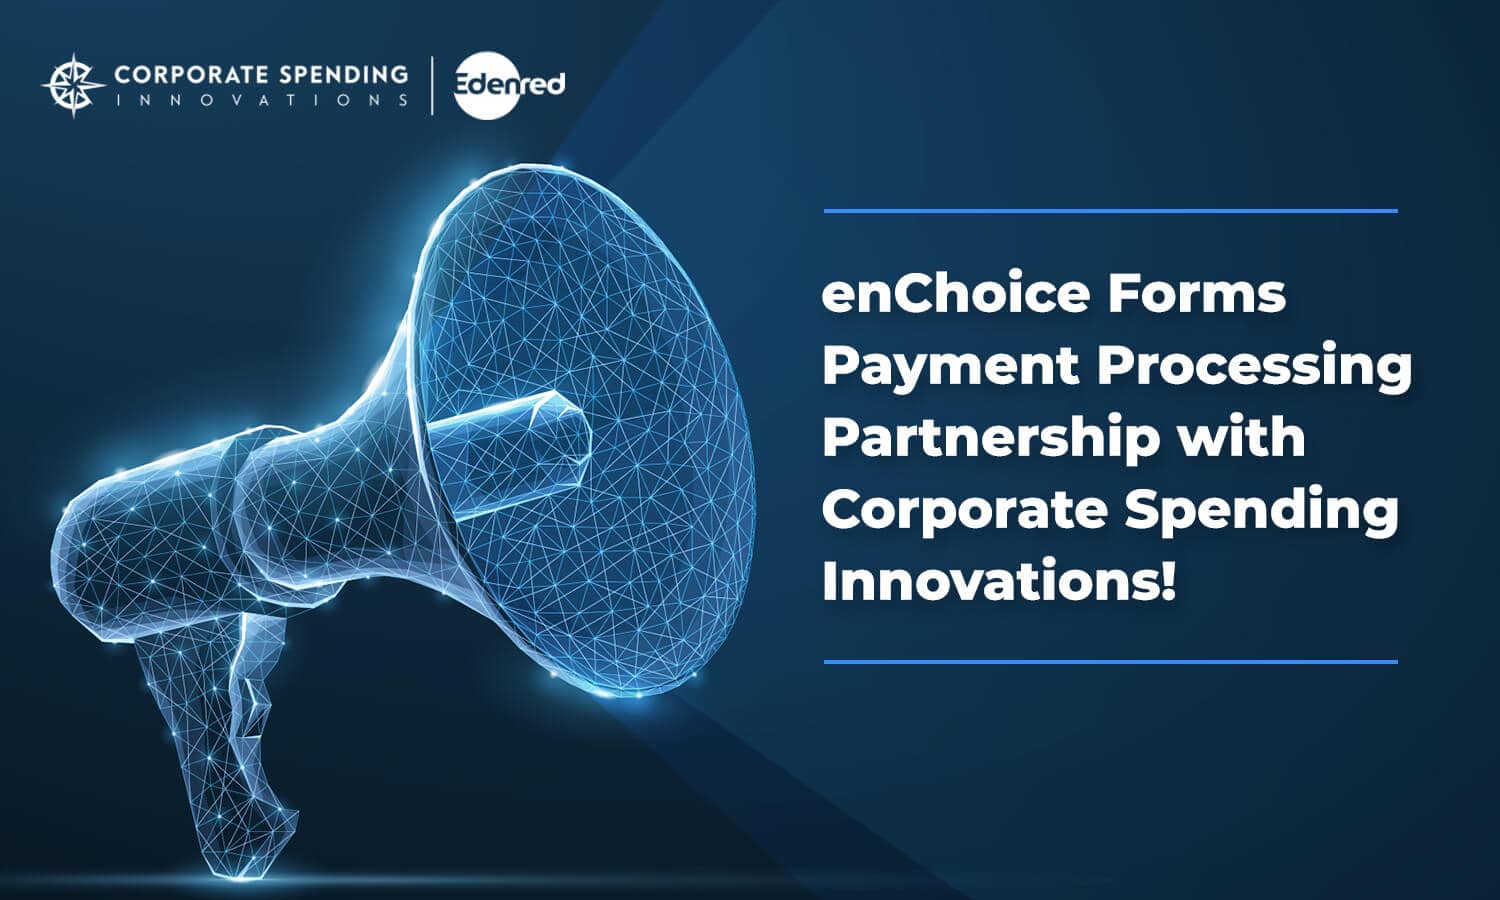 enChoice Announces Payment Processing Partnership with Corporate Spending Innovations